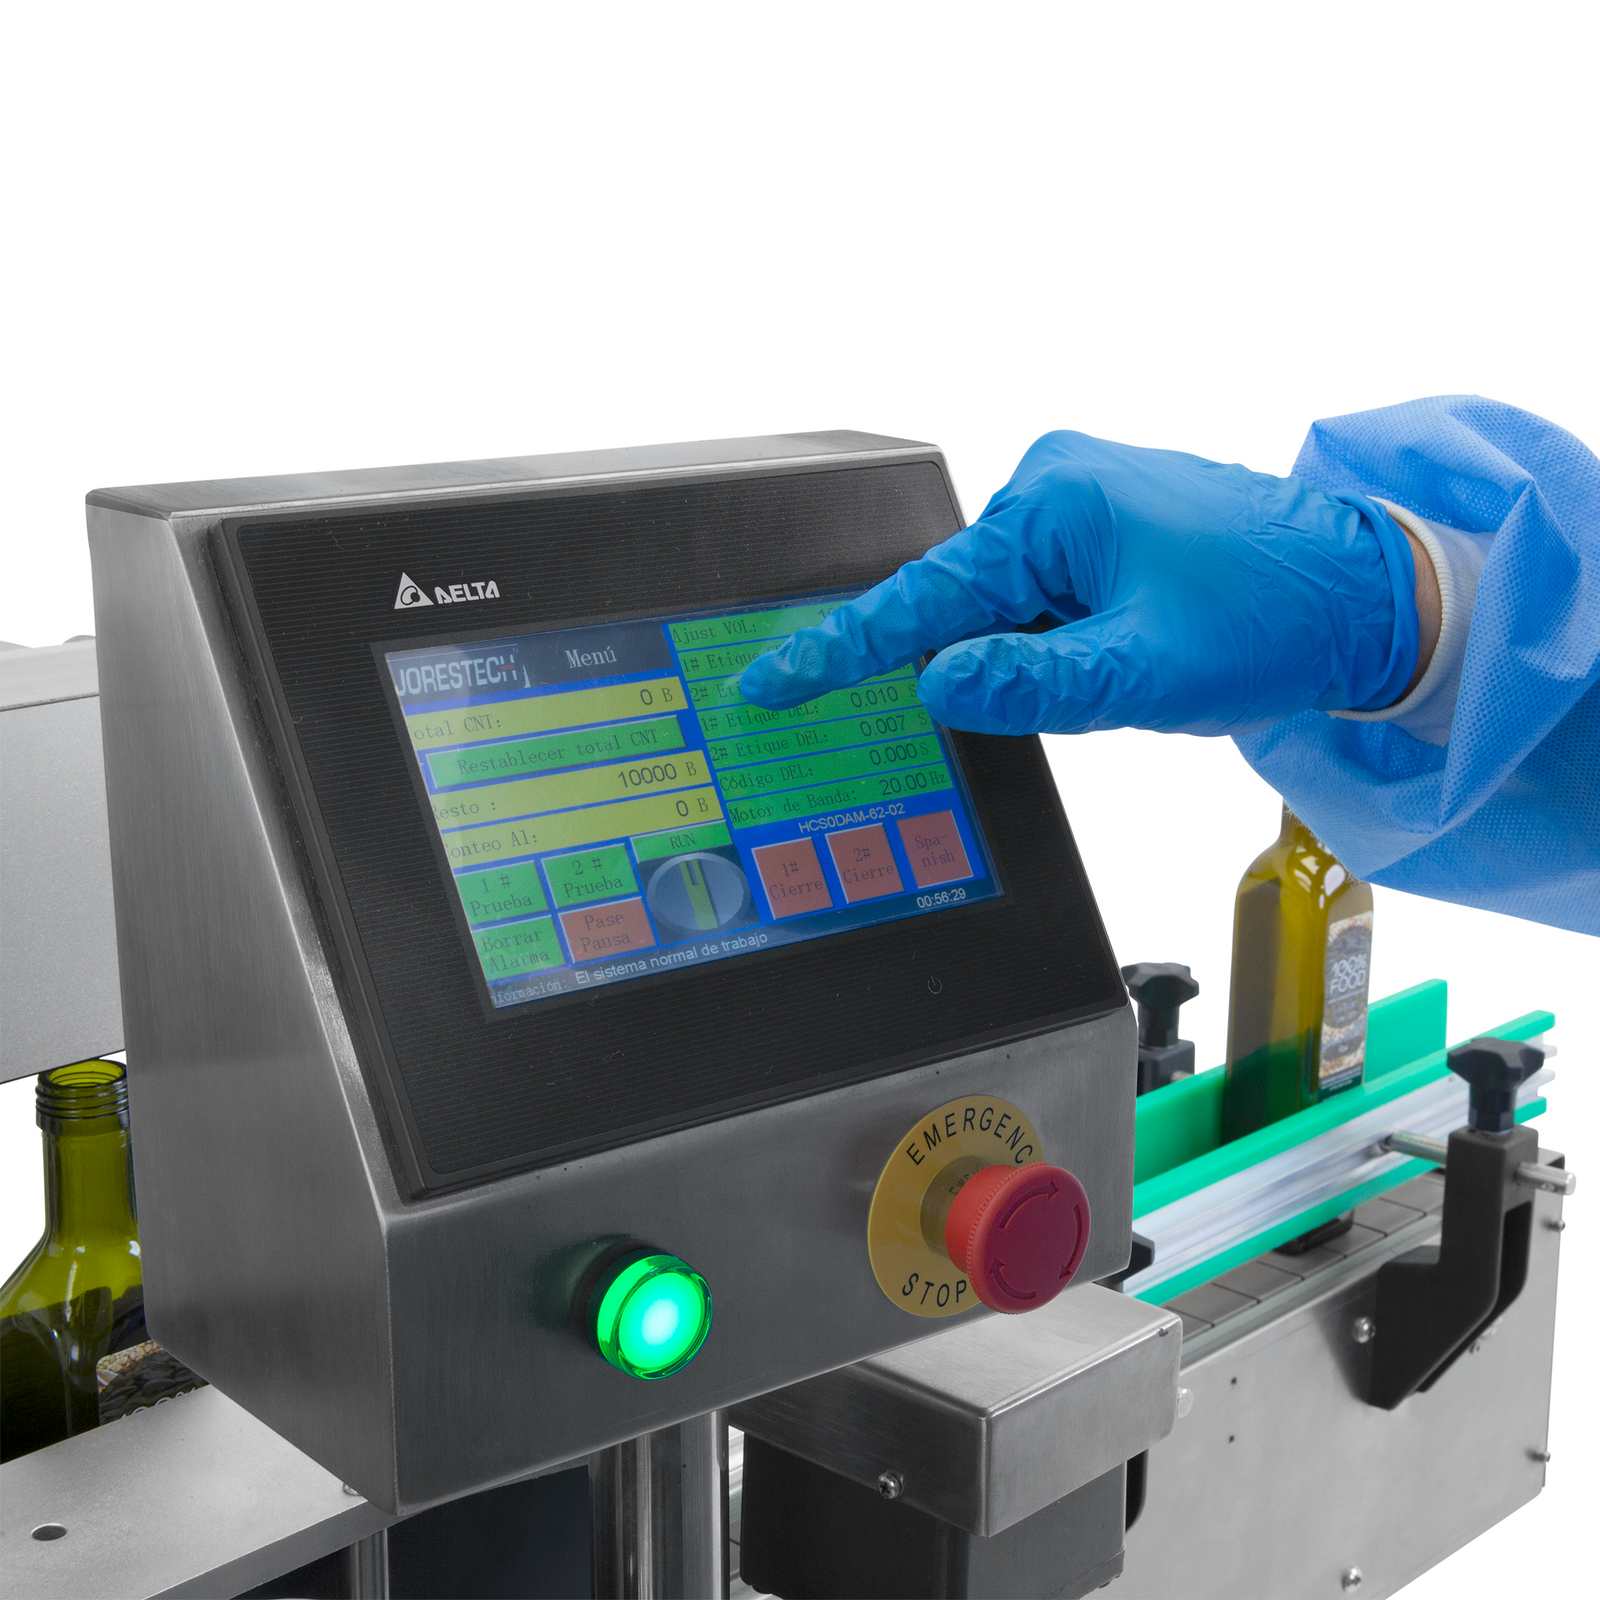 operator wearing blue disposable nitrile gloves using the digital control panel on the JORESTECH dual automatic label applicator